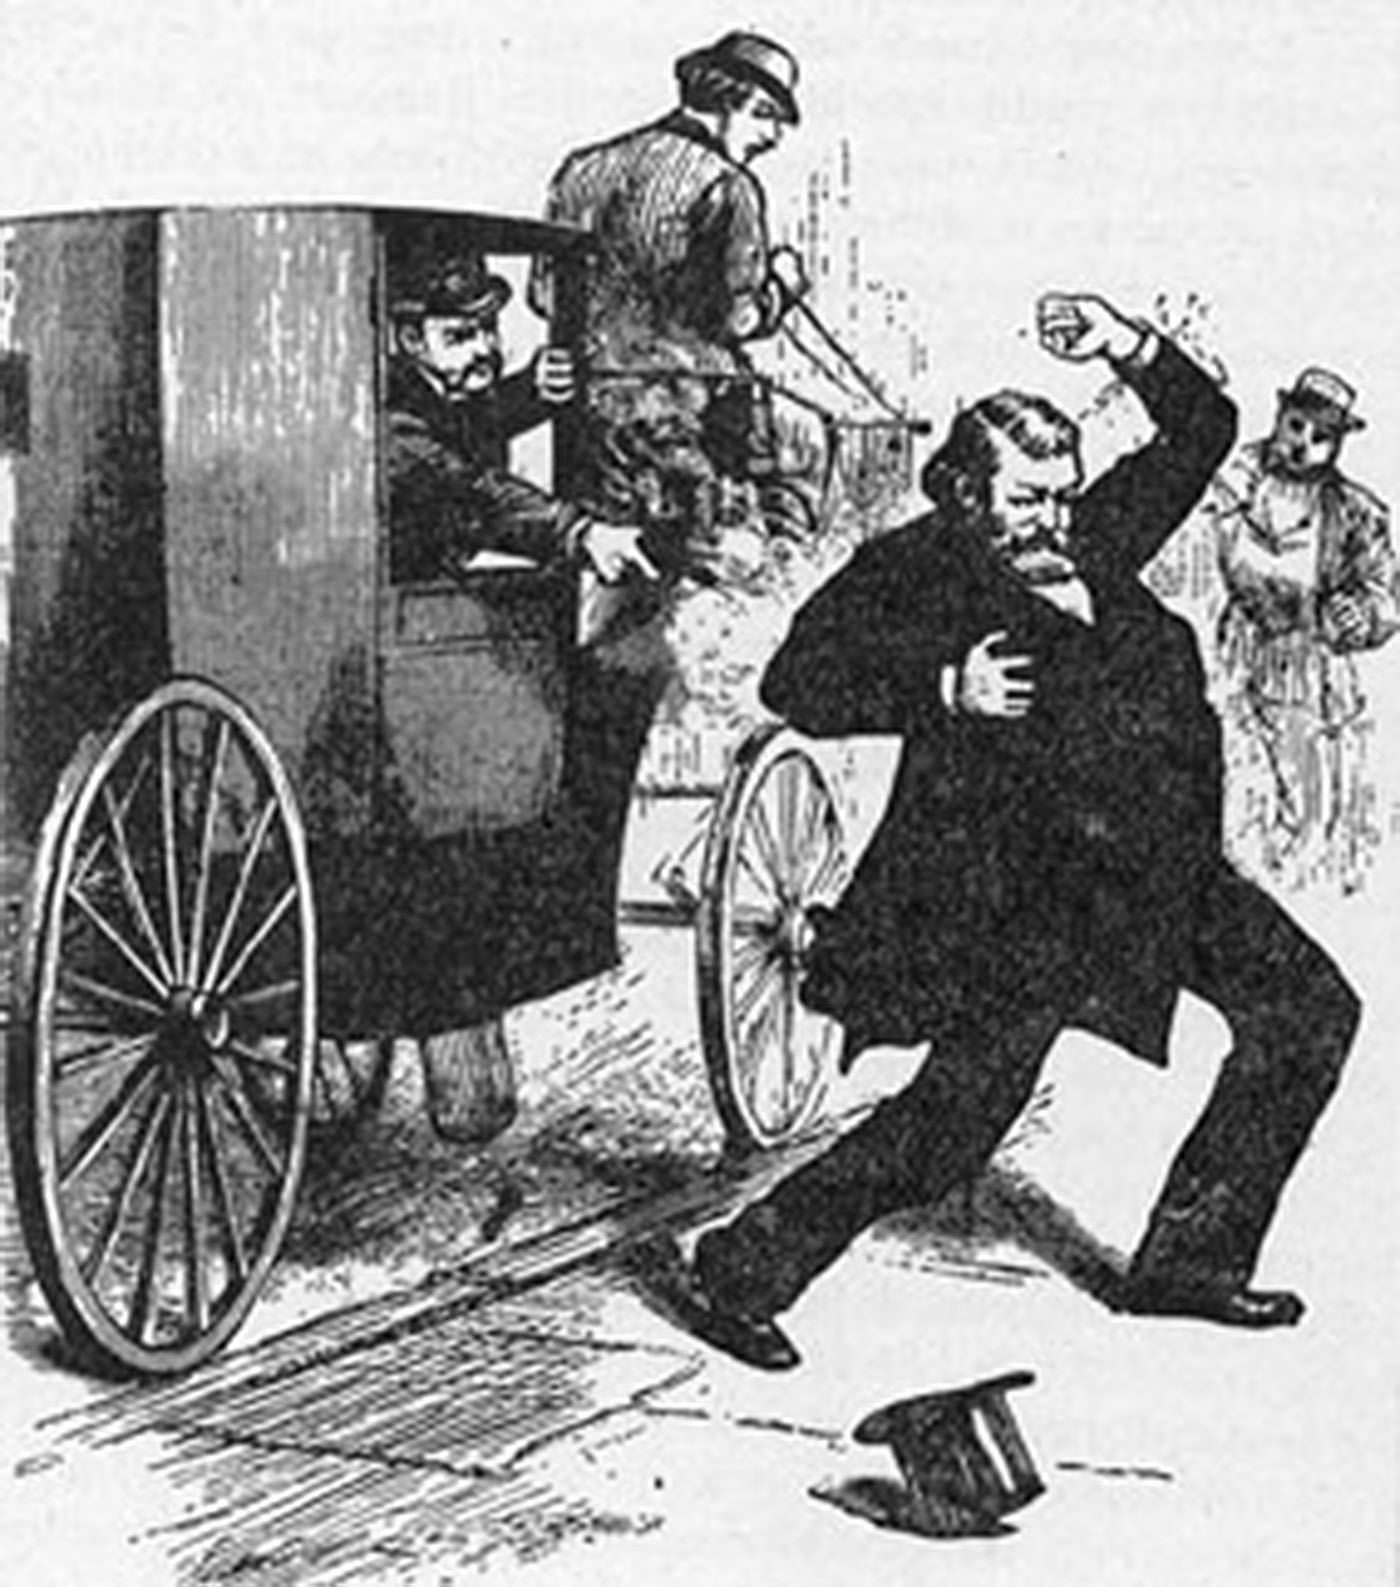 An illustration of Charles de Young shooting Reverend Isaac Kalloch.